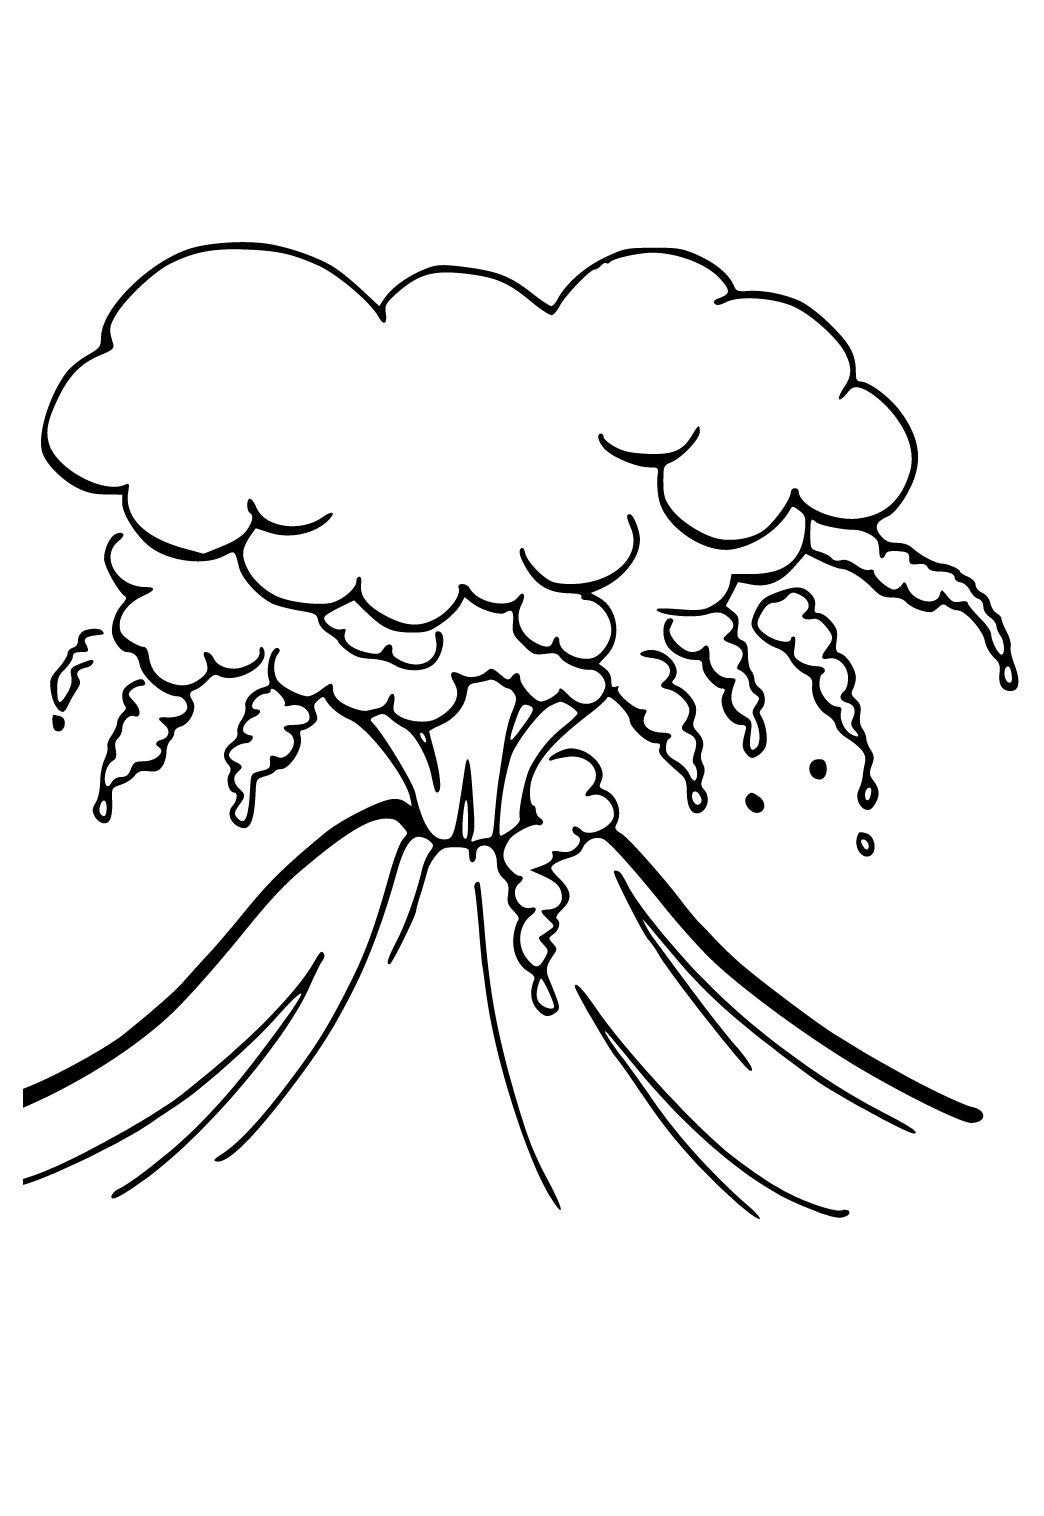 Free printable volcano explosion coloring page for adults and kids